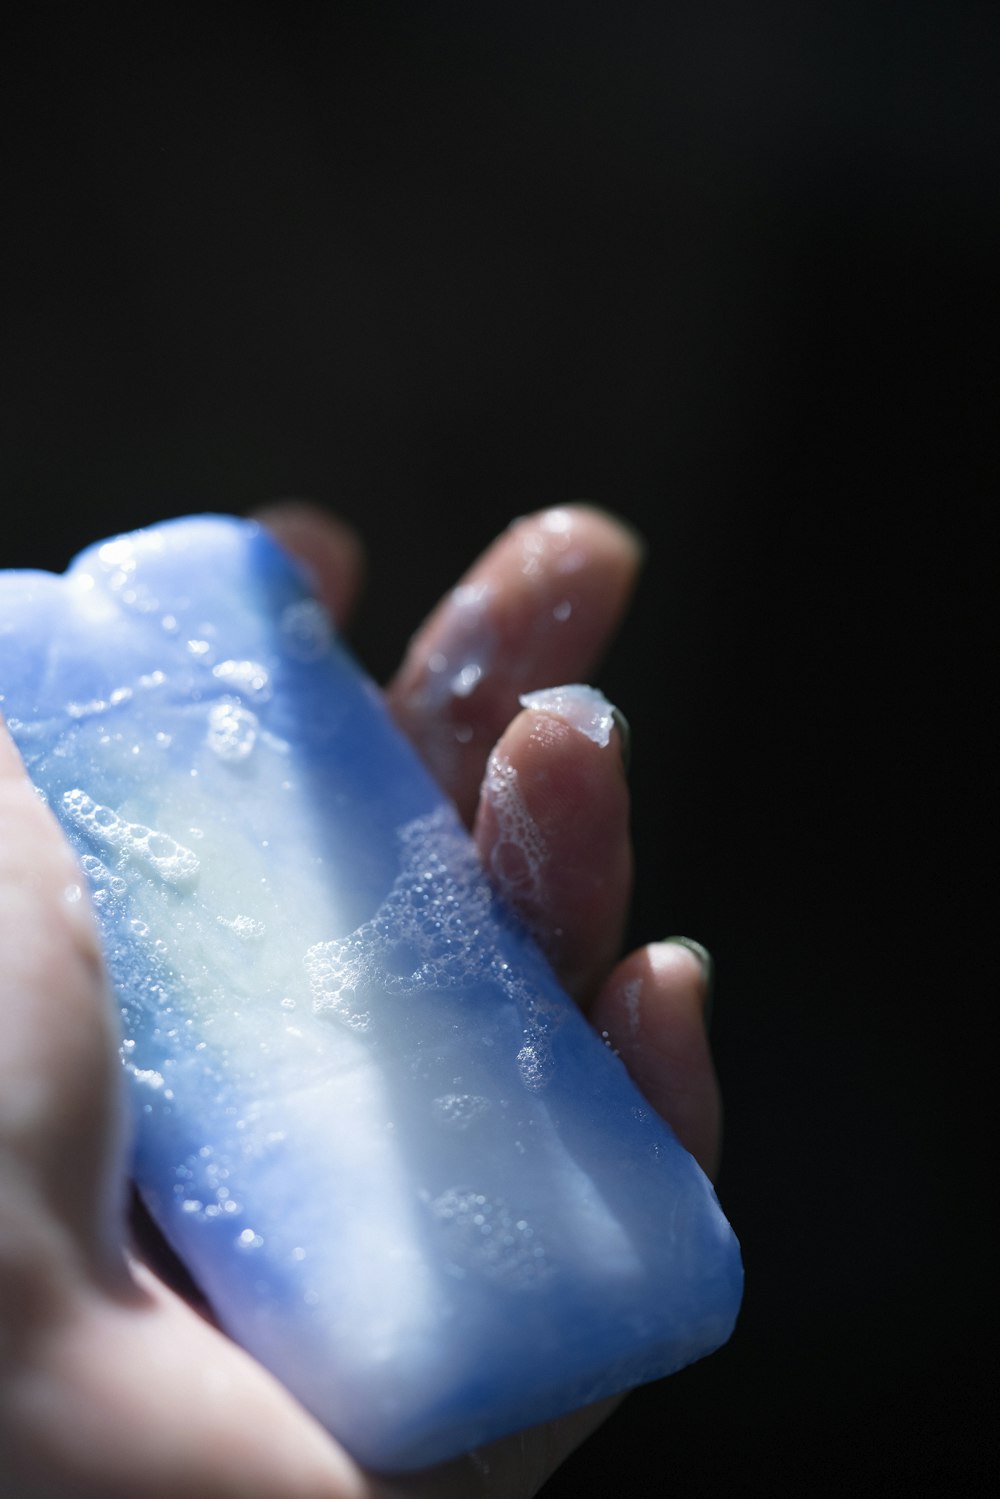 a person holding a soap bar in their hand